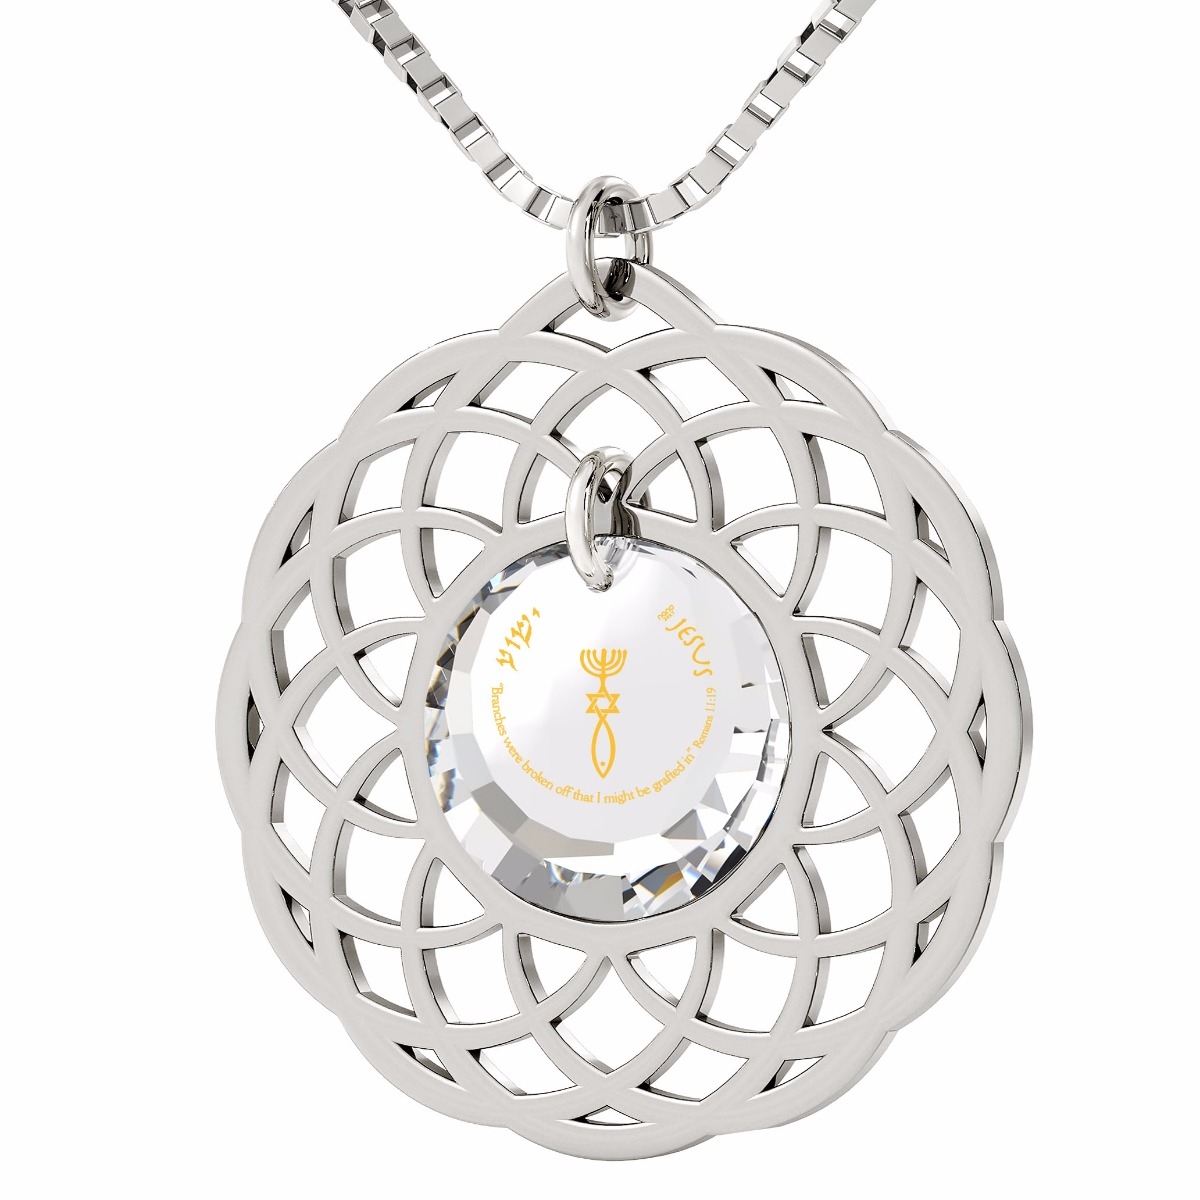 Nano Jewelry Sterling Silver & Crystal Grafted-In Mandala Necklace with 24k Gold Micro-Inscription (White) - 1